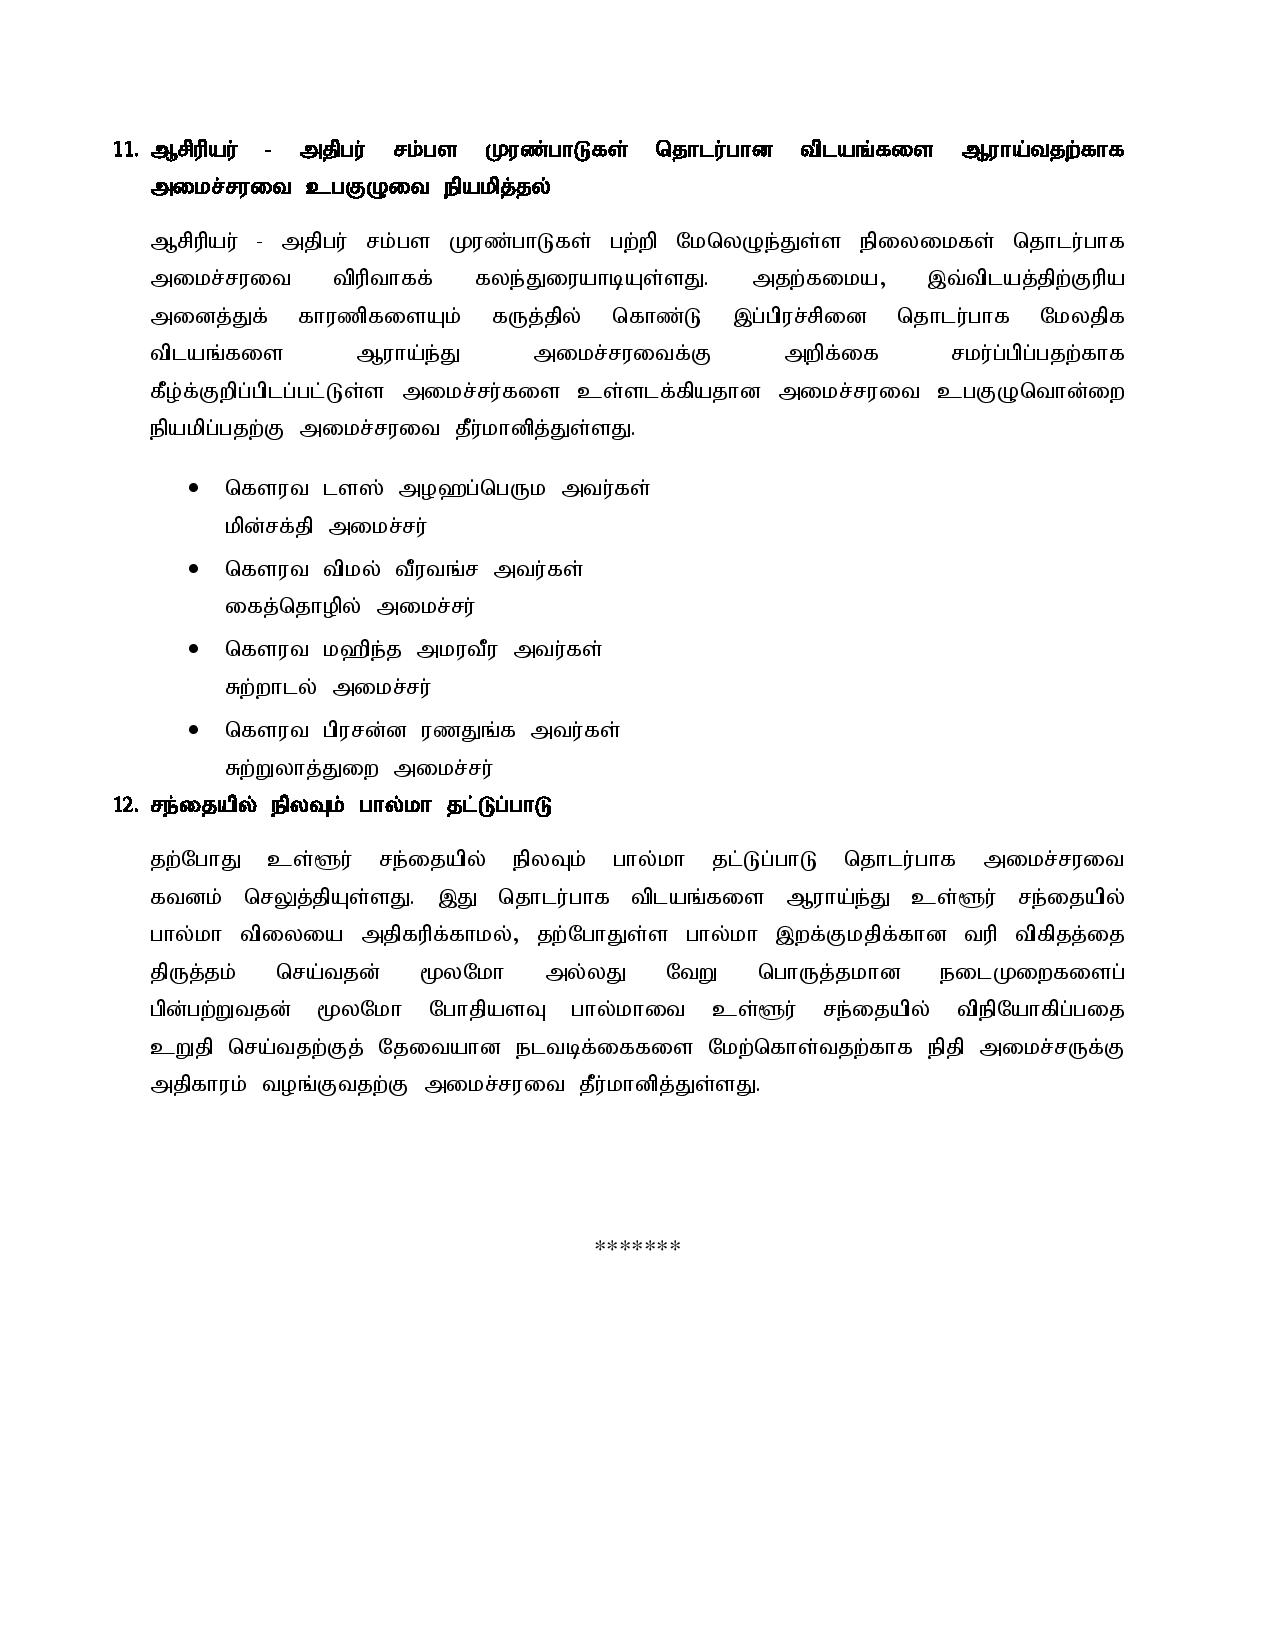 Cabinet Decision on 2021.08.09 Tamil page 005